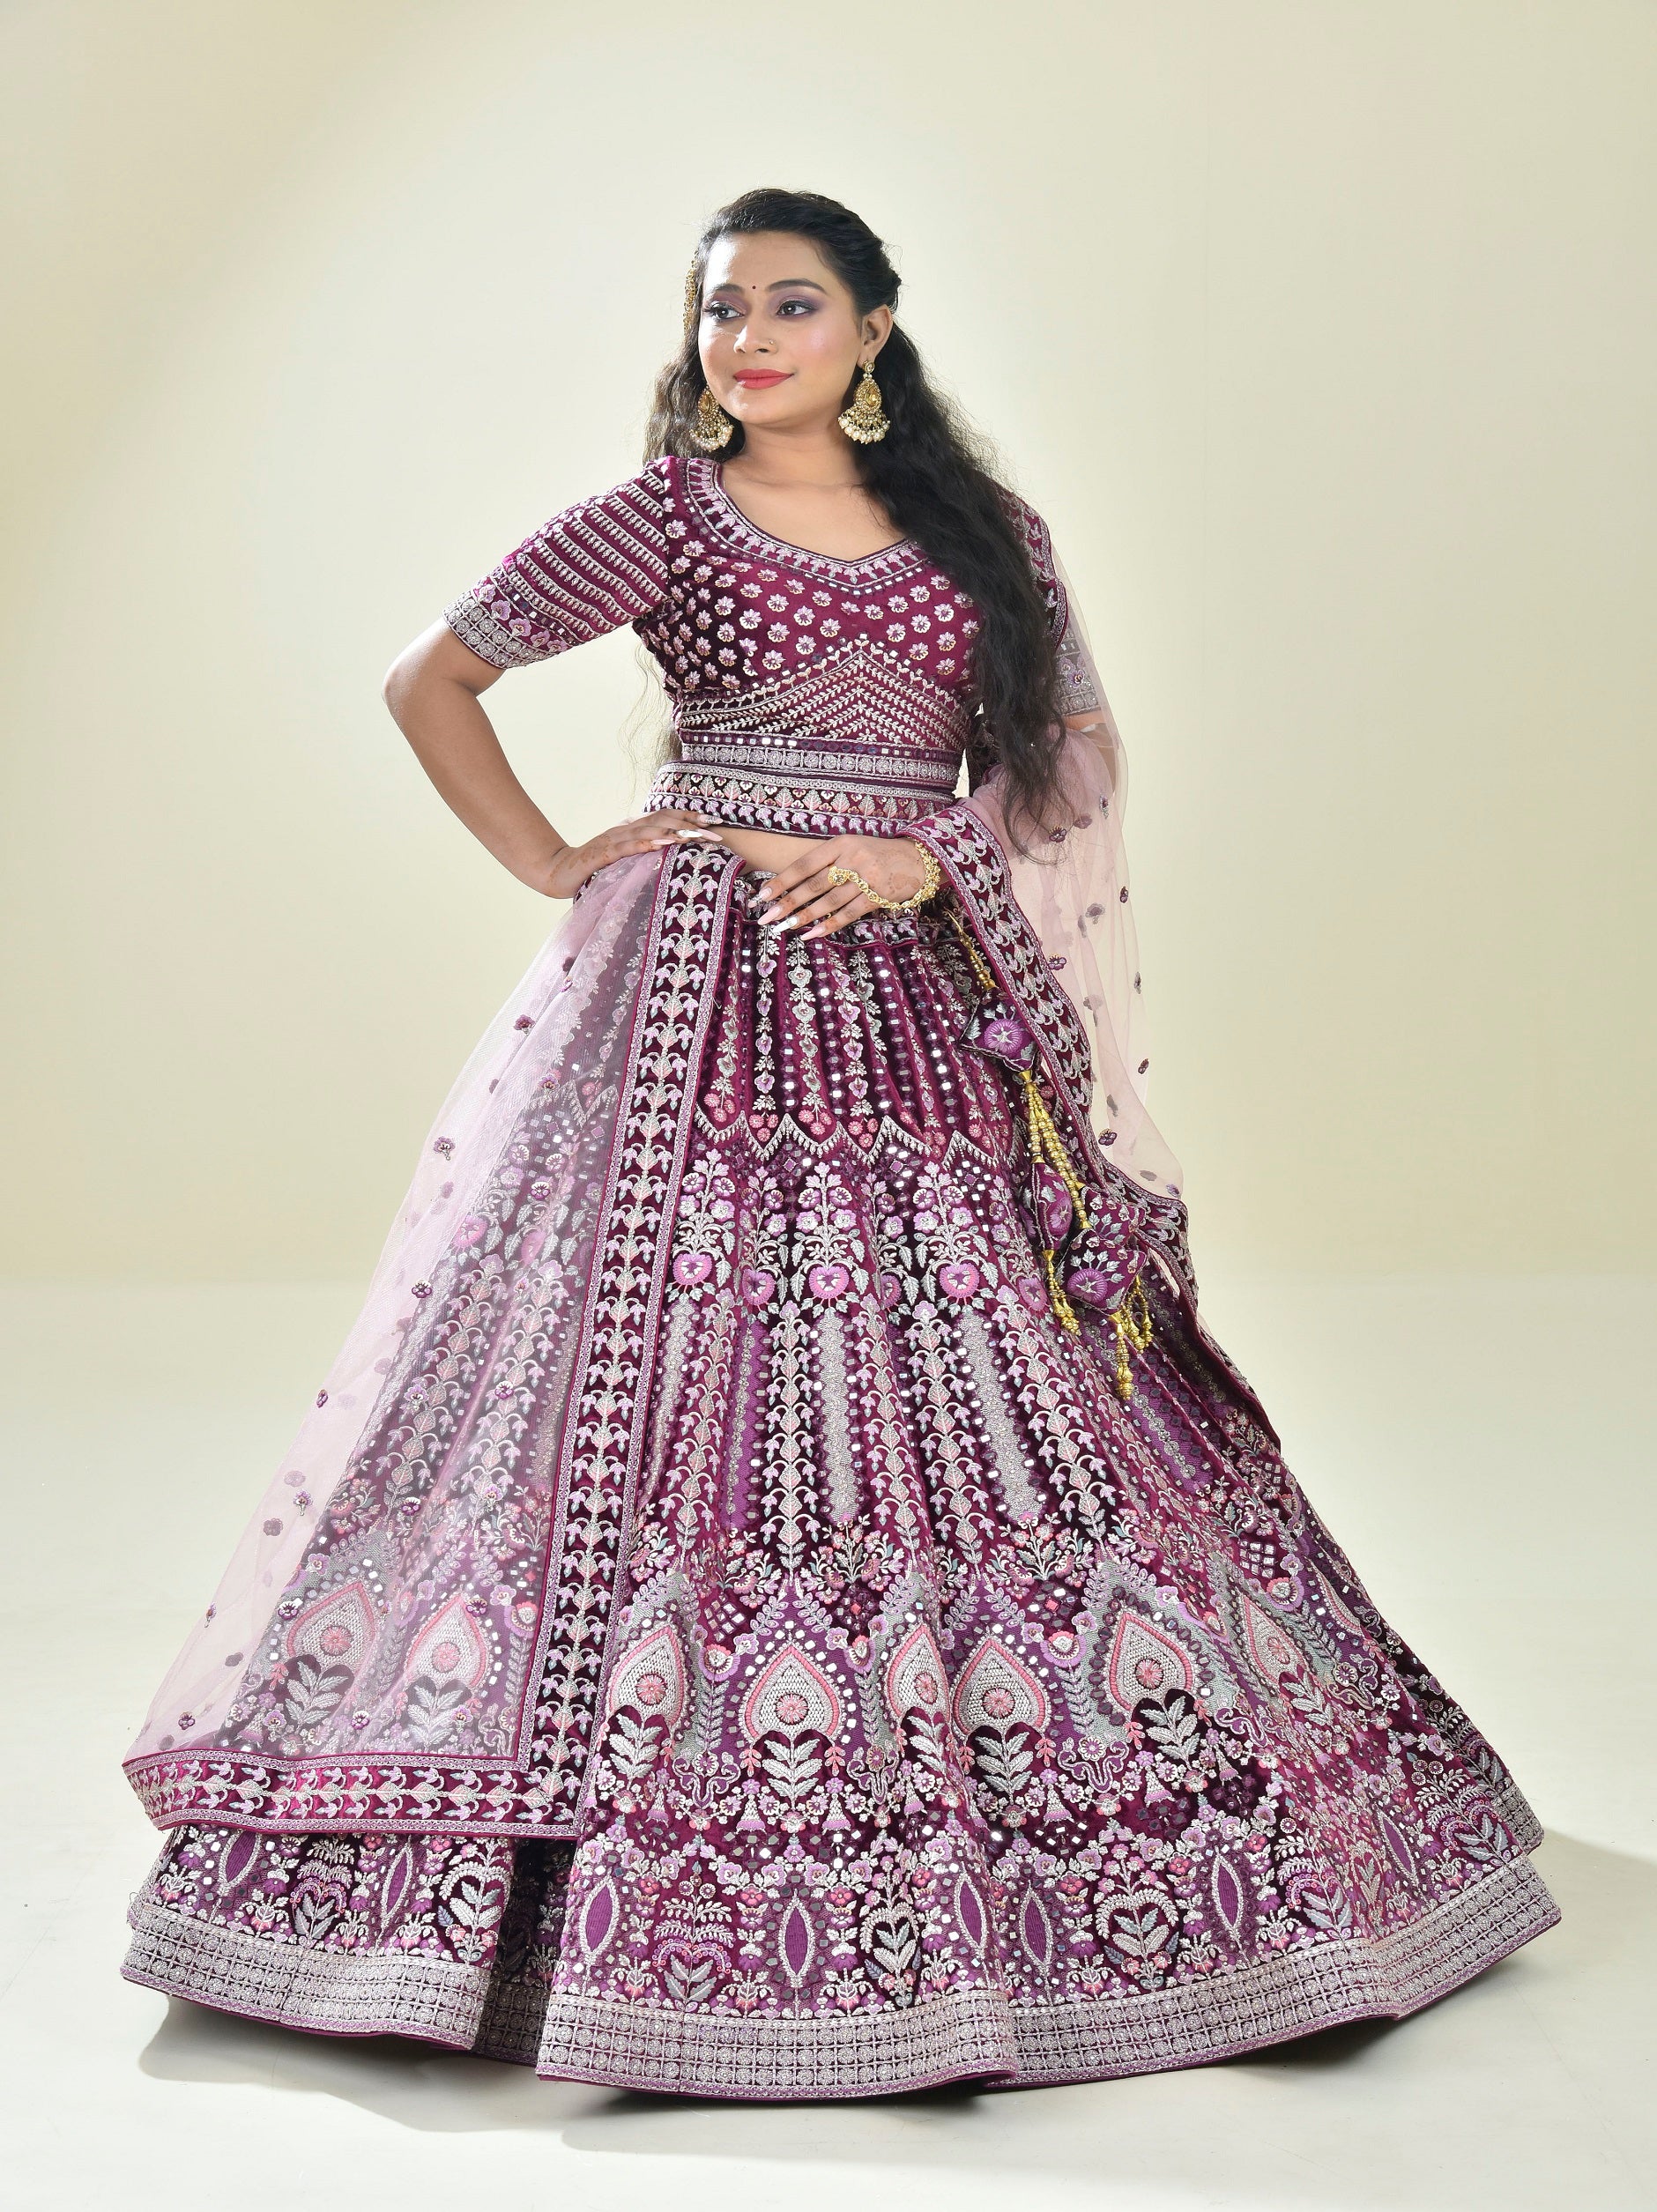 halfsaree collection with bridal, bridesmaid, partywear, banarasi, girlish lehengas with different color collection.